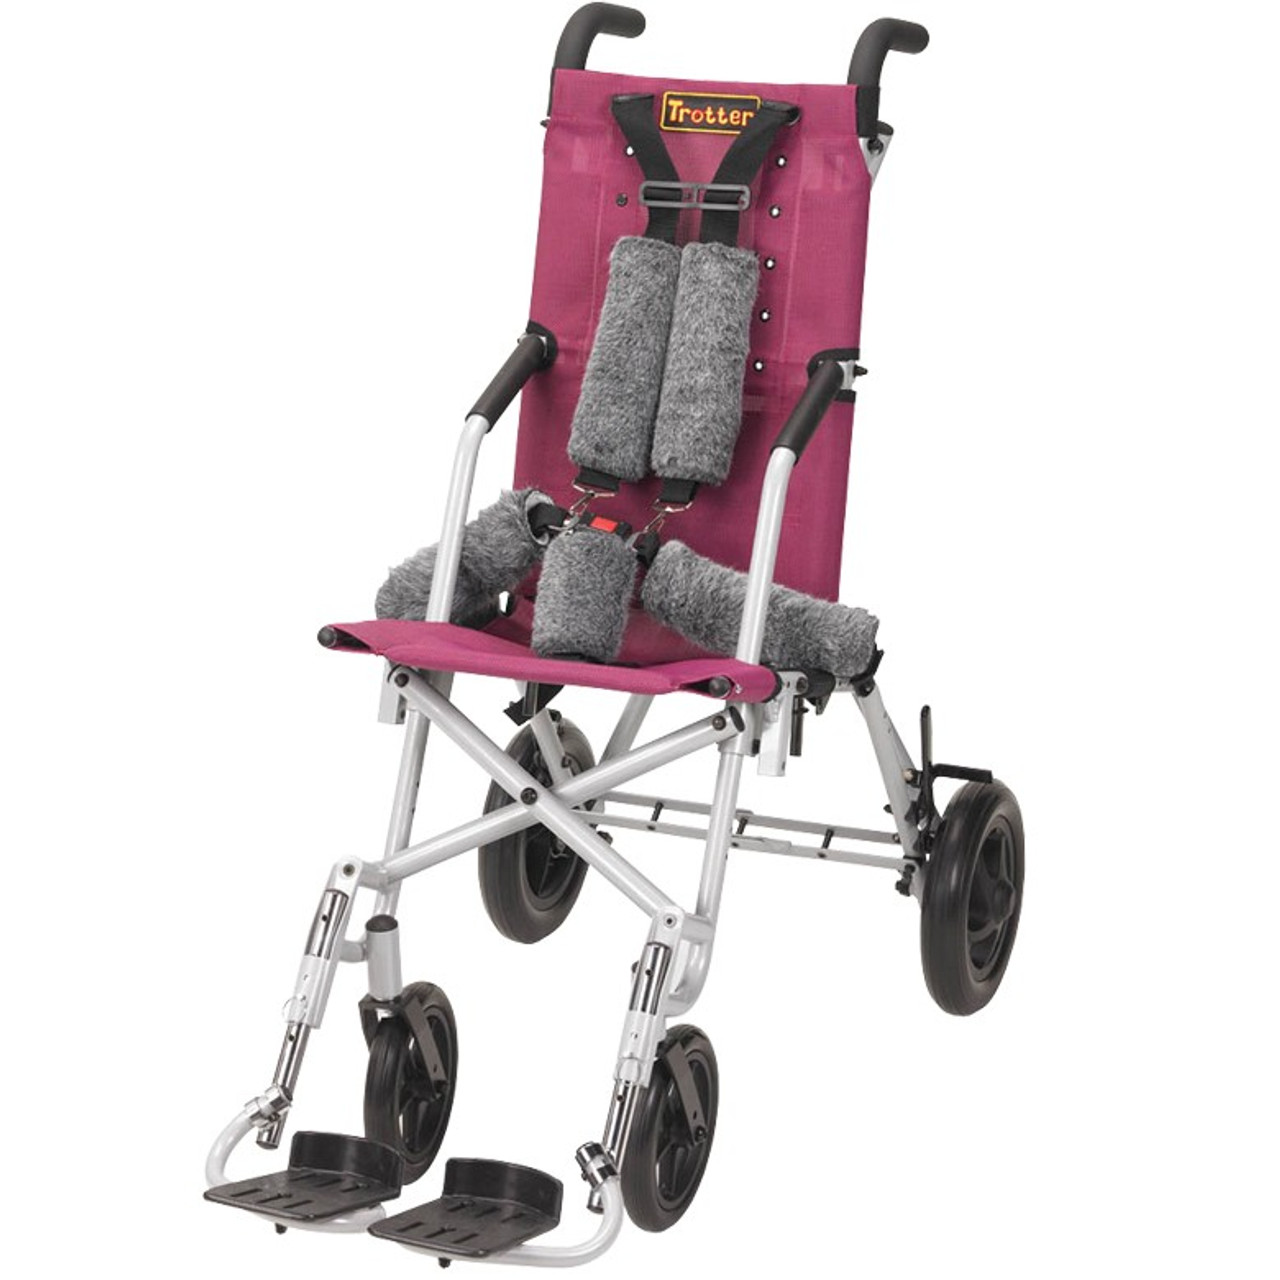 Drive TR 16SB-R Rose Colored Upholstery for Trotter (TR 16SB-R)